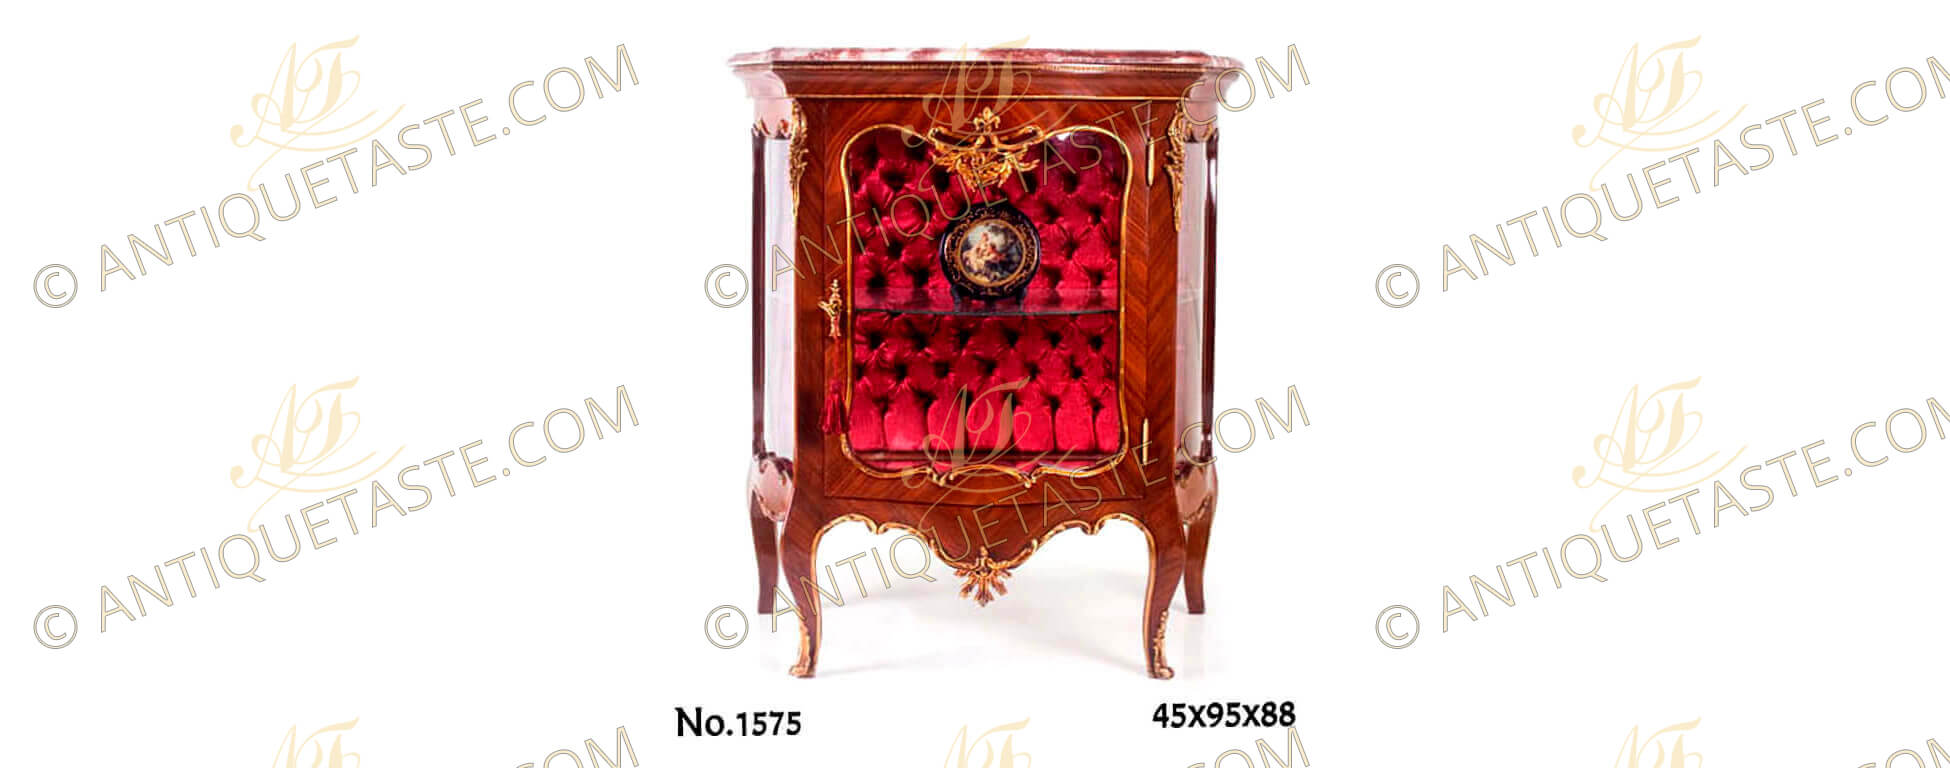 A beautiful French Louis XV style ormolu-mounted Cabinet Vitrine De Salon after the model by François Linke, elegantly ornamented with delicate ormolu filet to the contour and acanthus works, marble topped and upholstered with velvet tufted back.